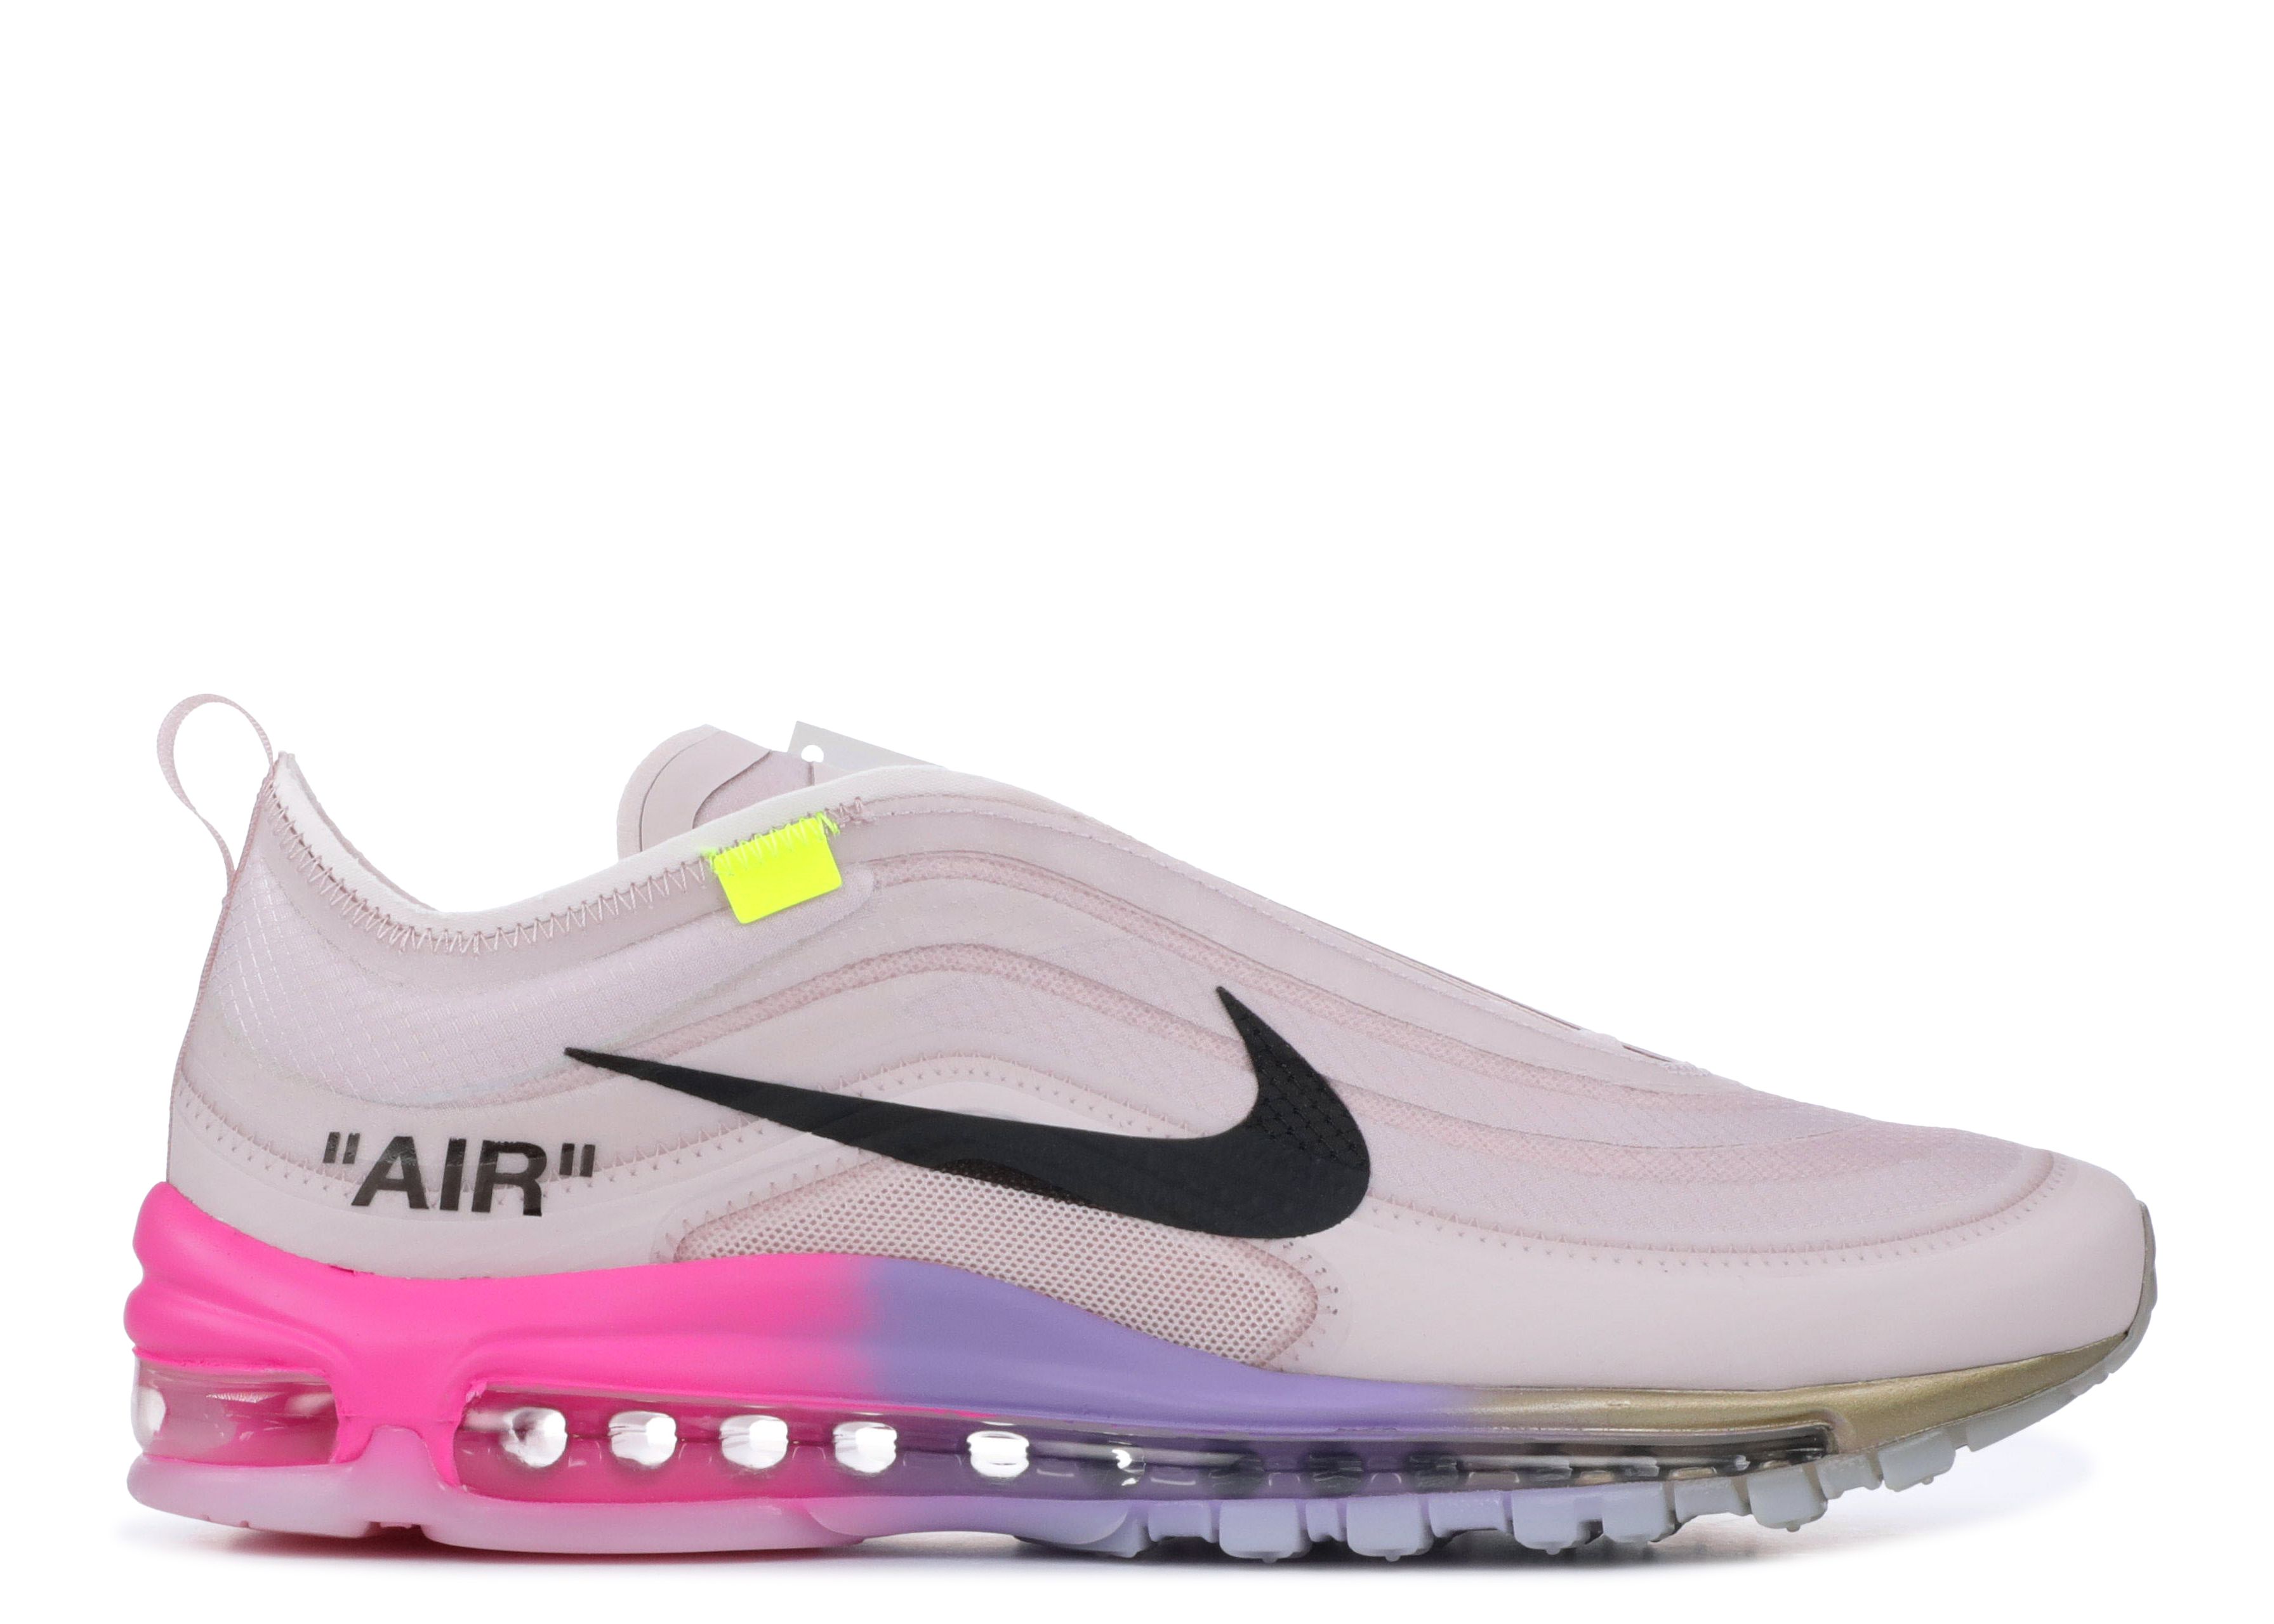 Serena Williams x Off-White x Air Max 97 OG 'Queen'